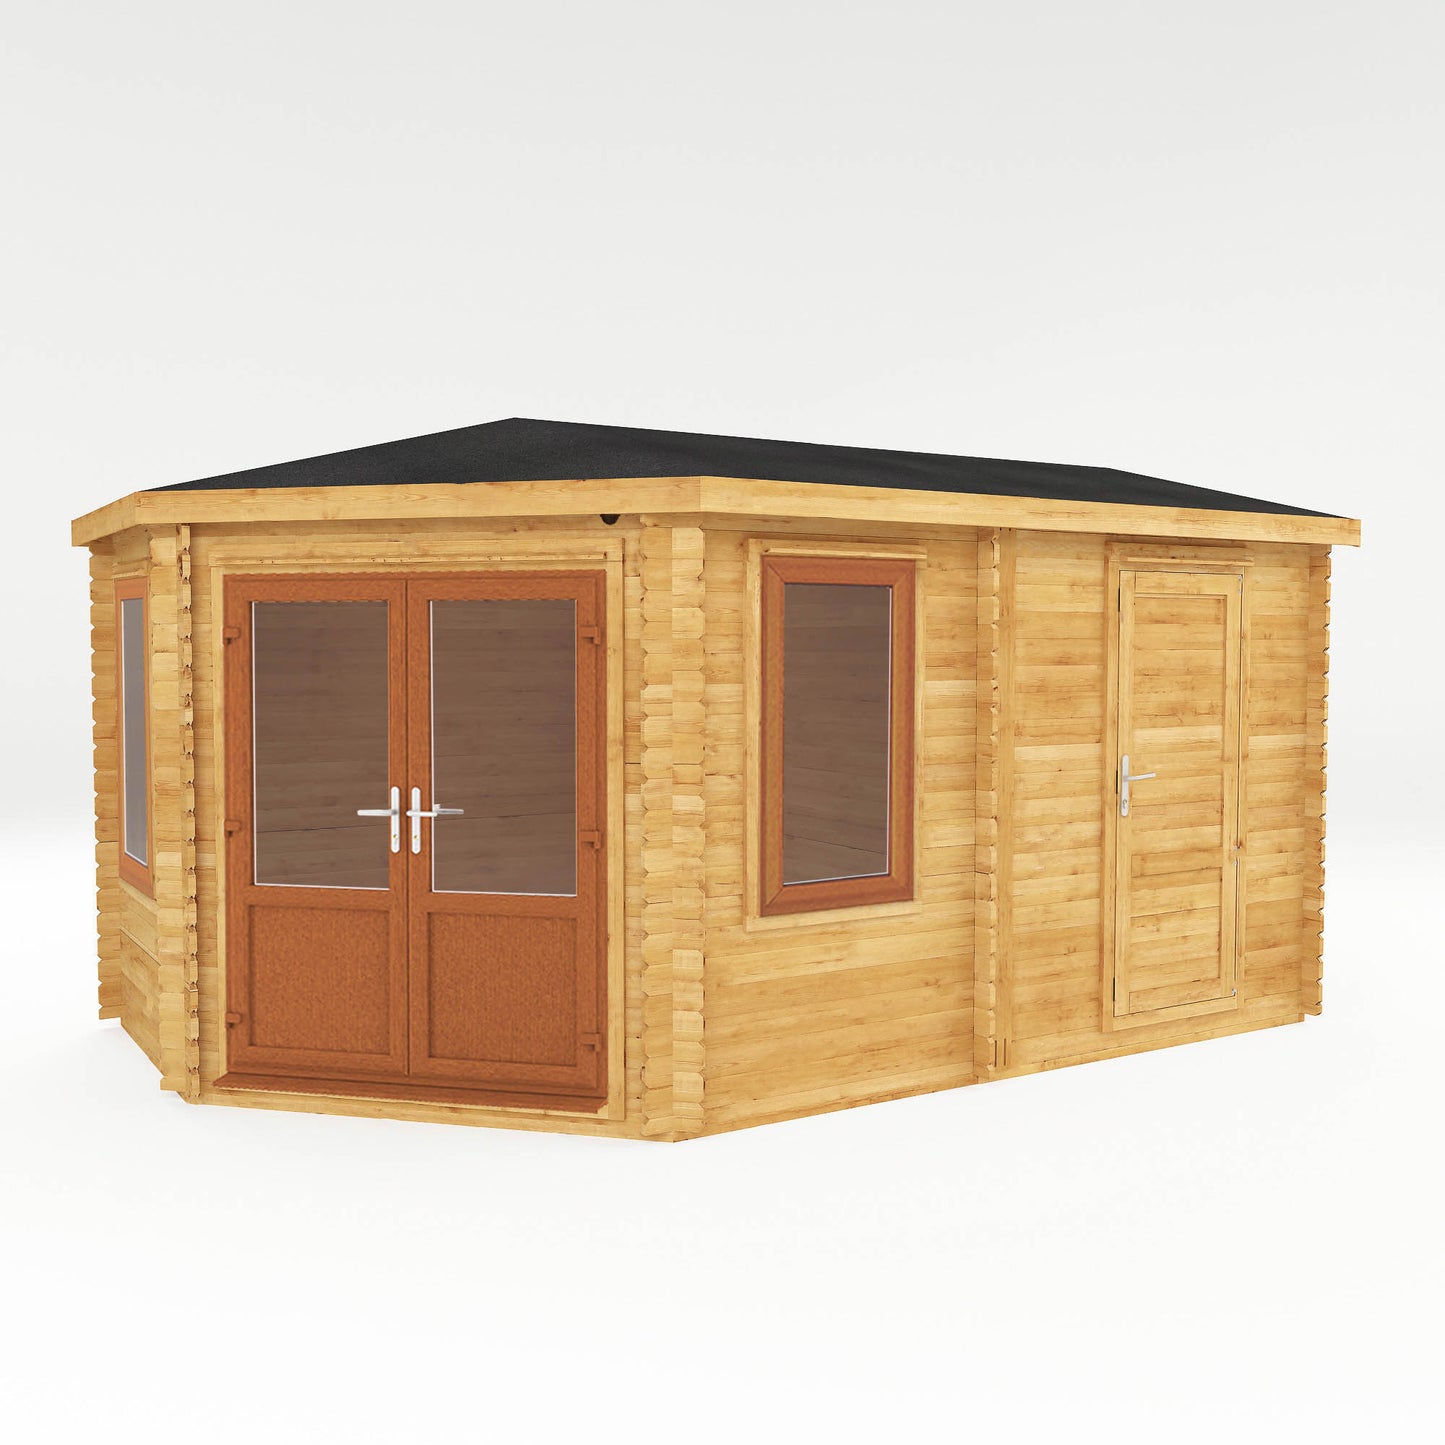 The Goldcrest 5m x 3m Log Cabin with Side Shed and Oak UPVC